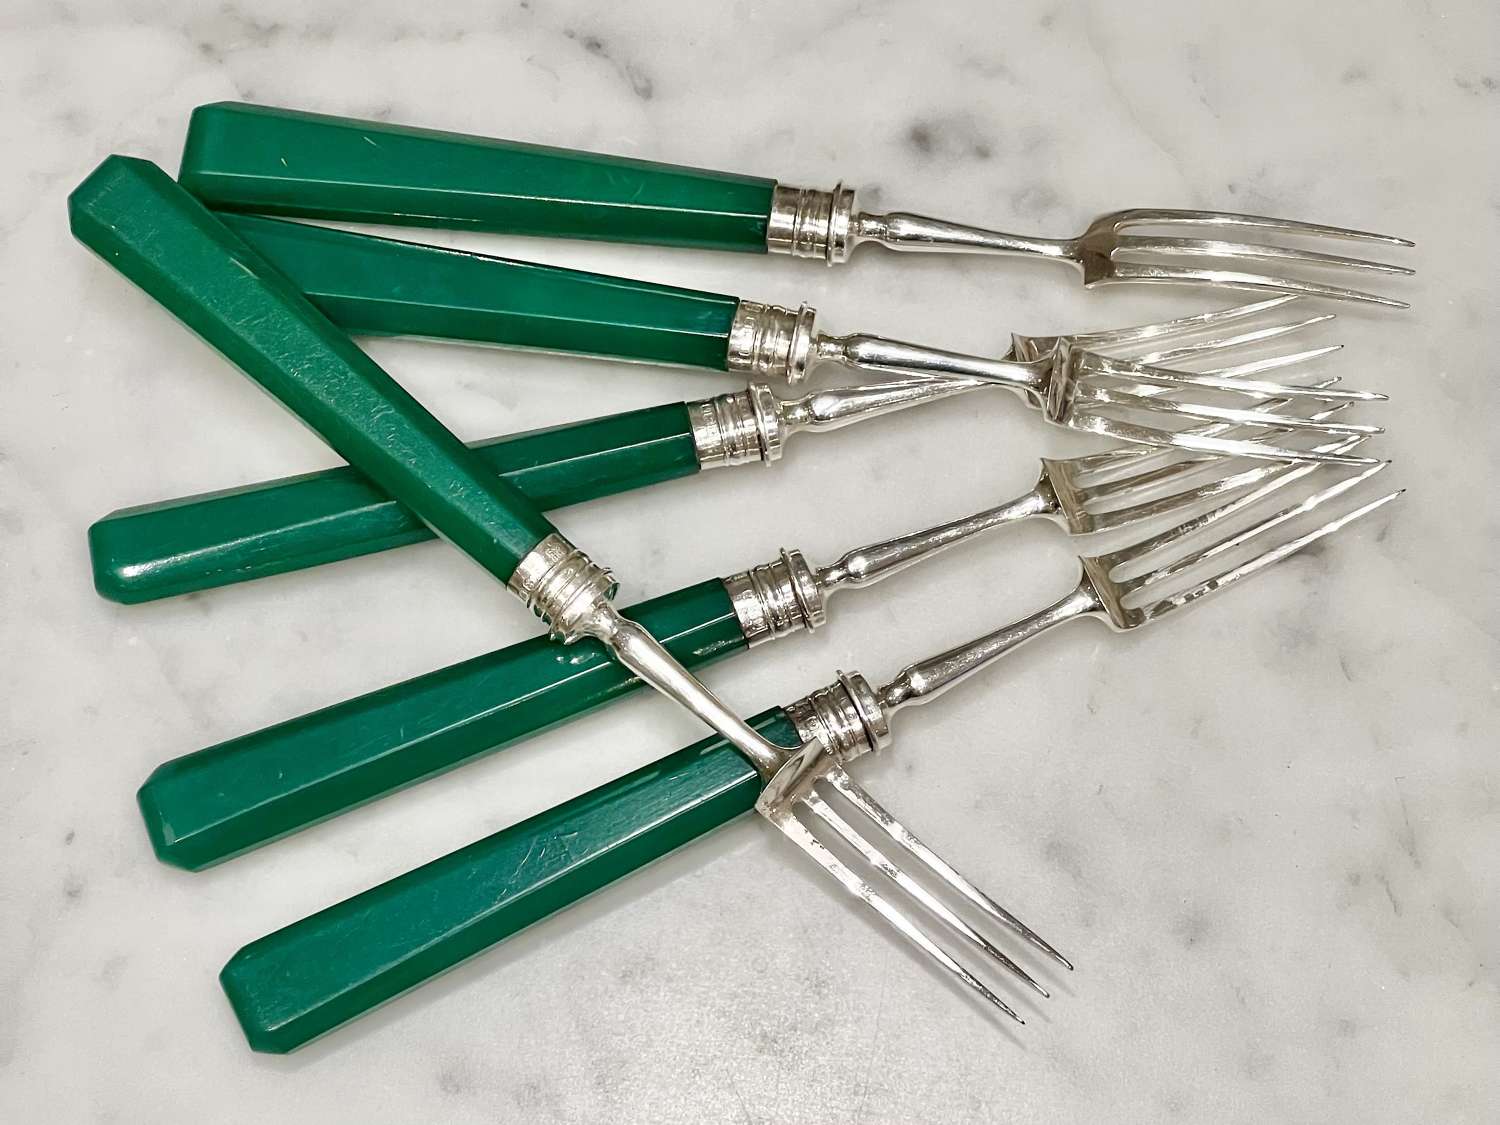 Art Deco silver dessert forks with emerald green handles